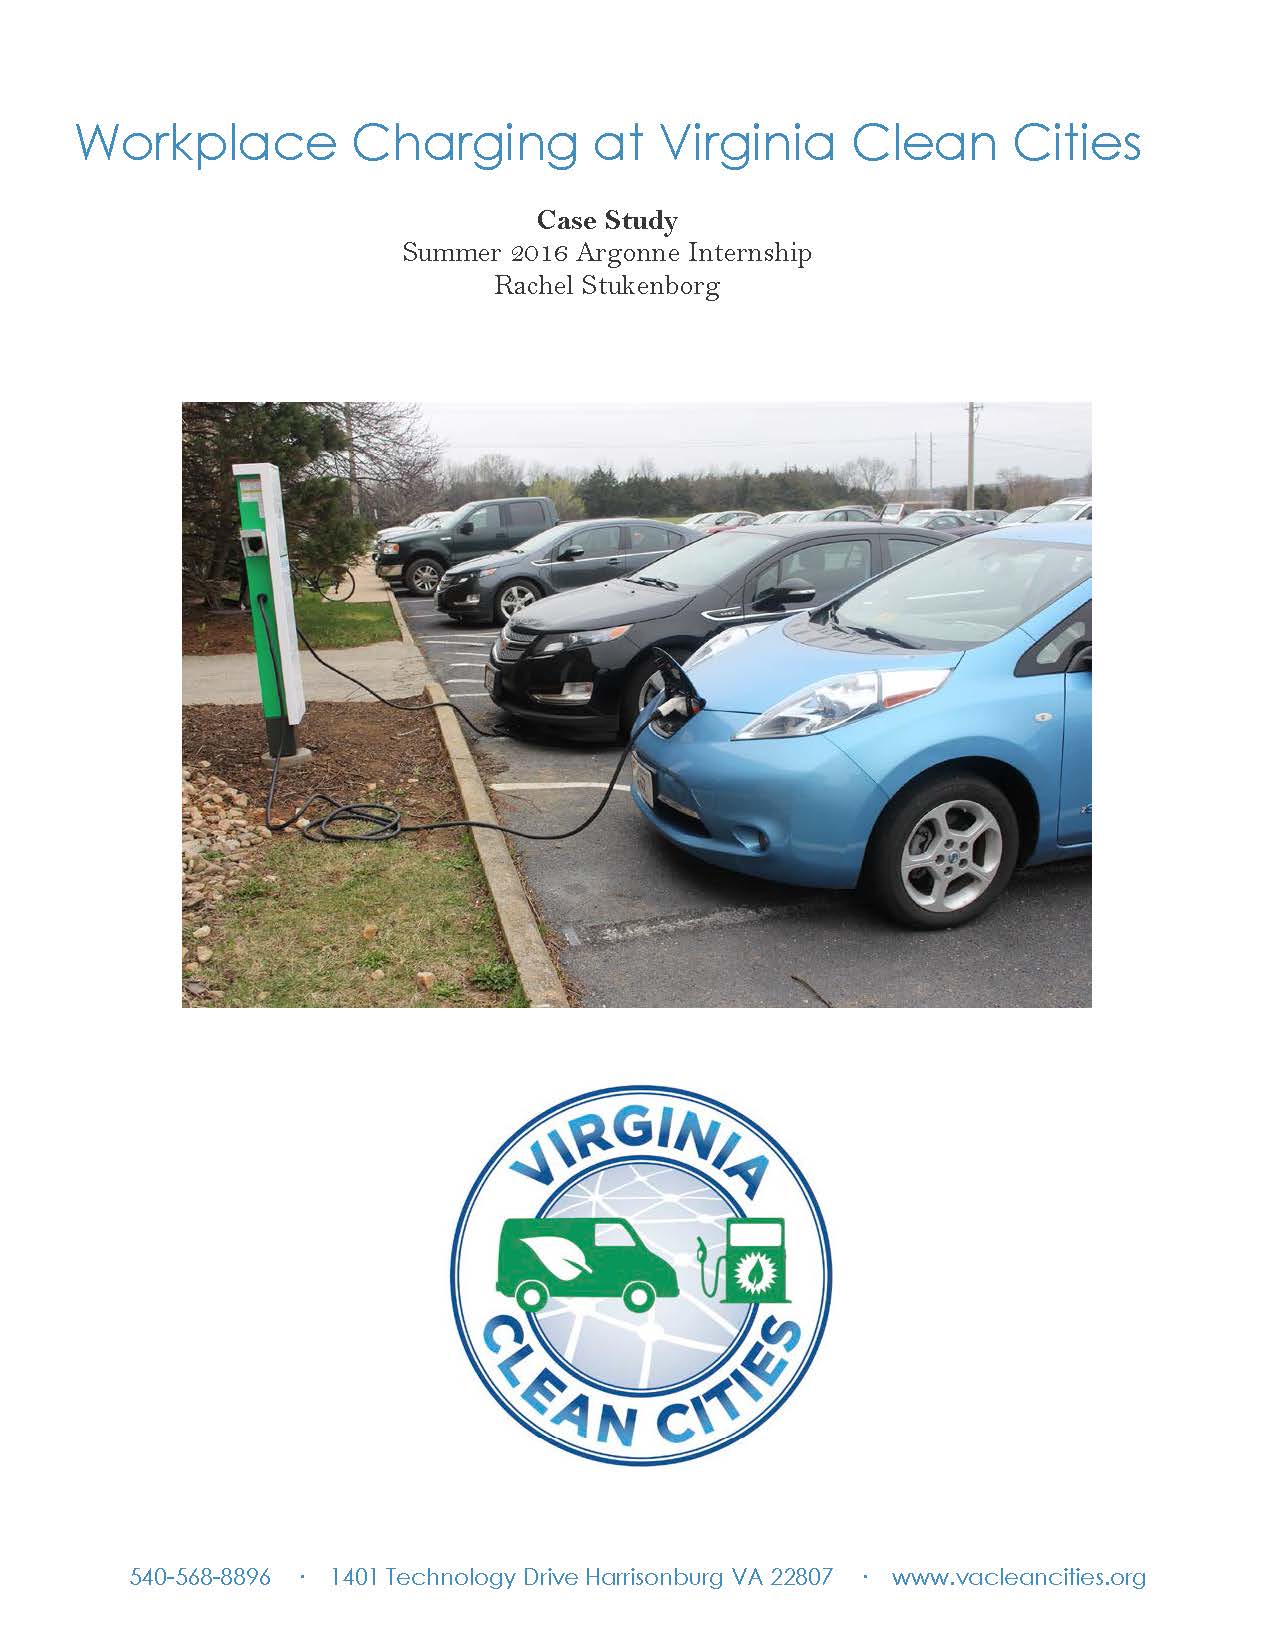 Workplace Charging Report coverpage